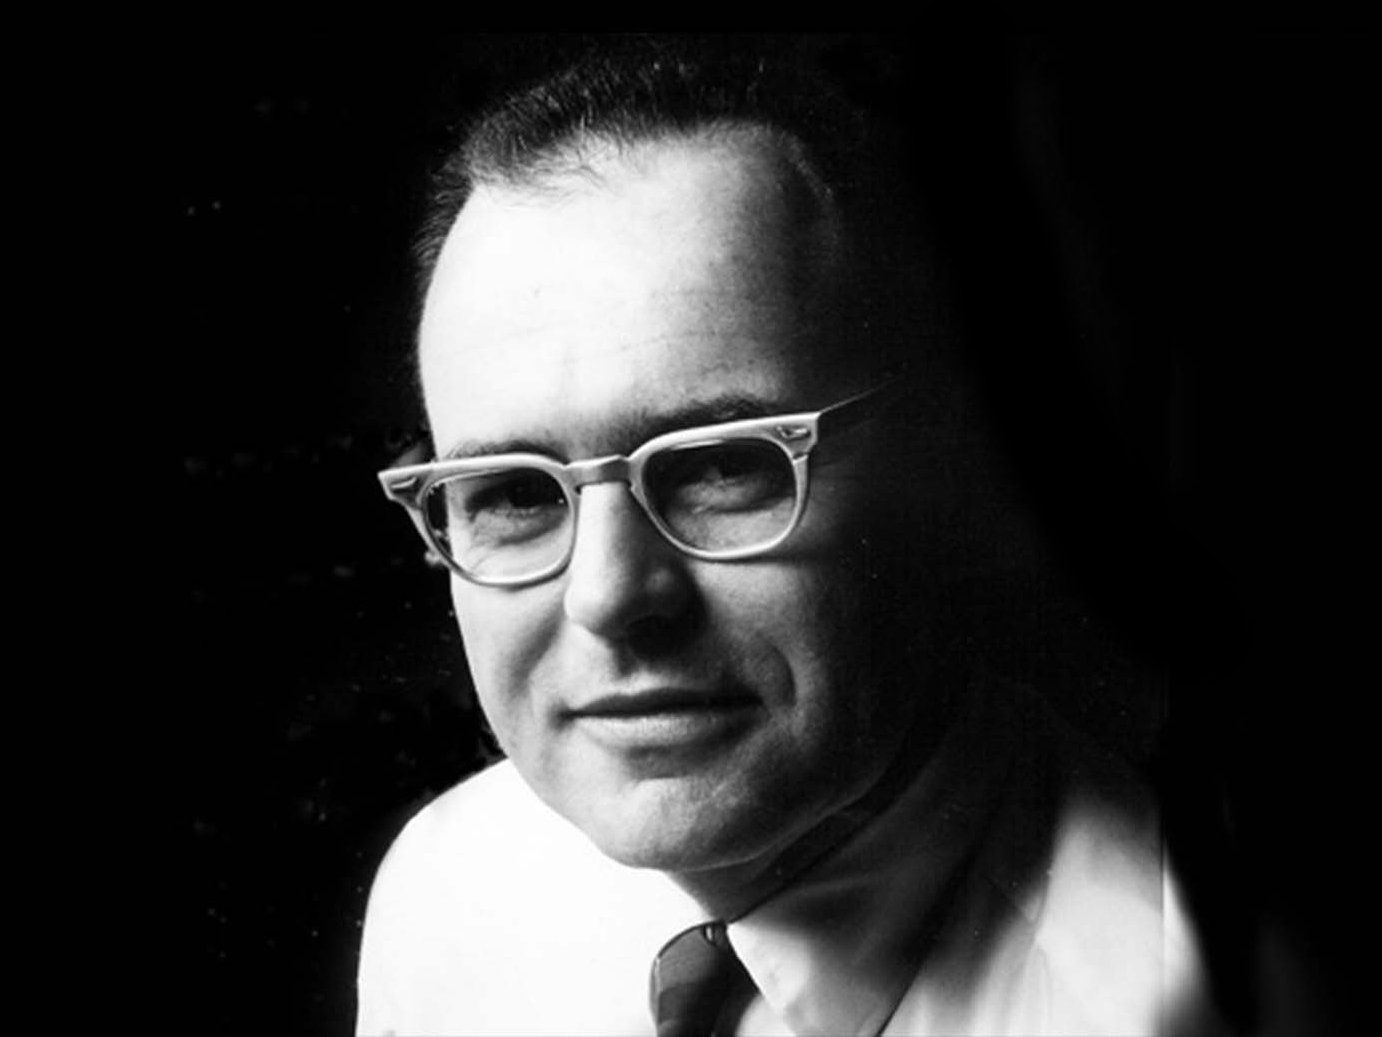 A black and white photo of a man in a tie and glasses.  